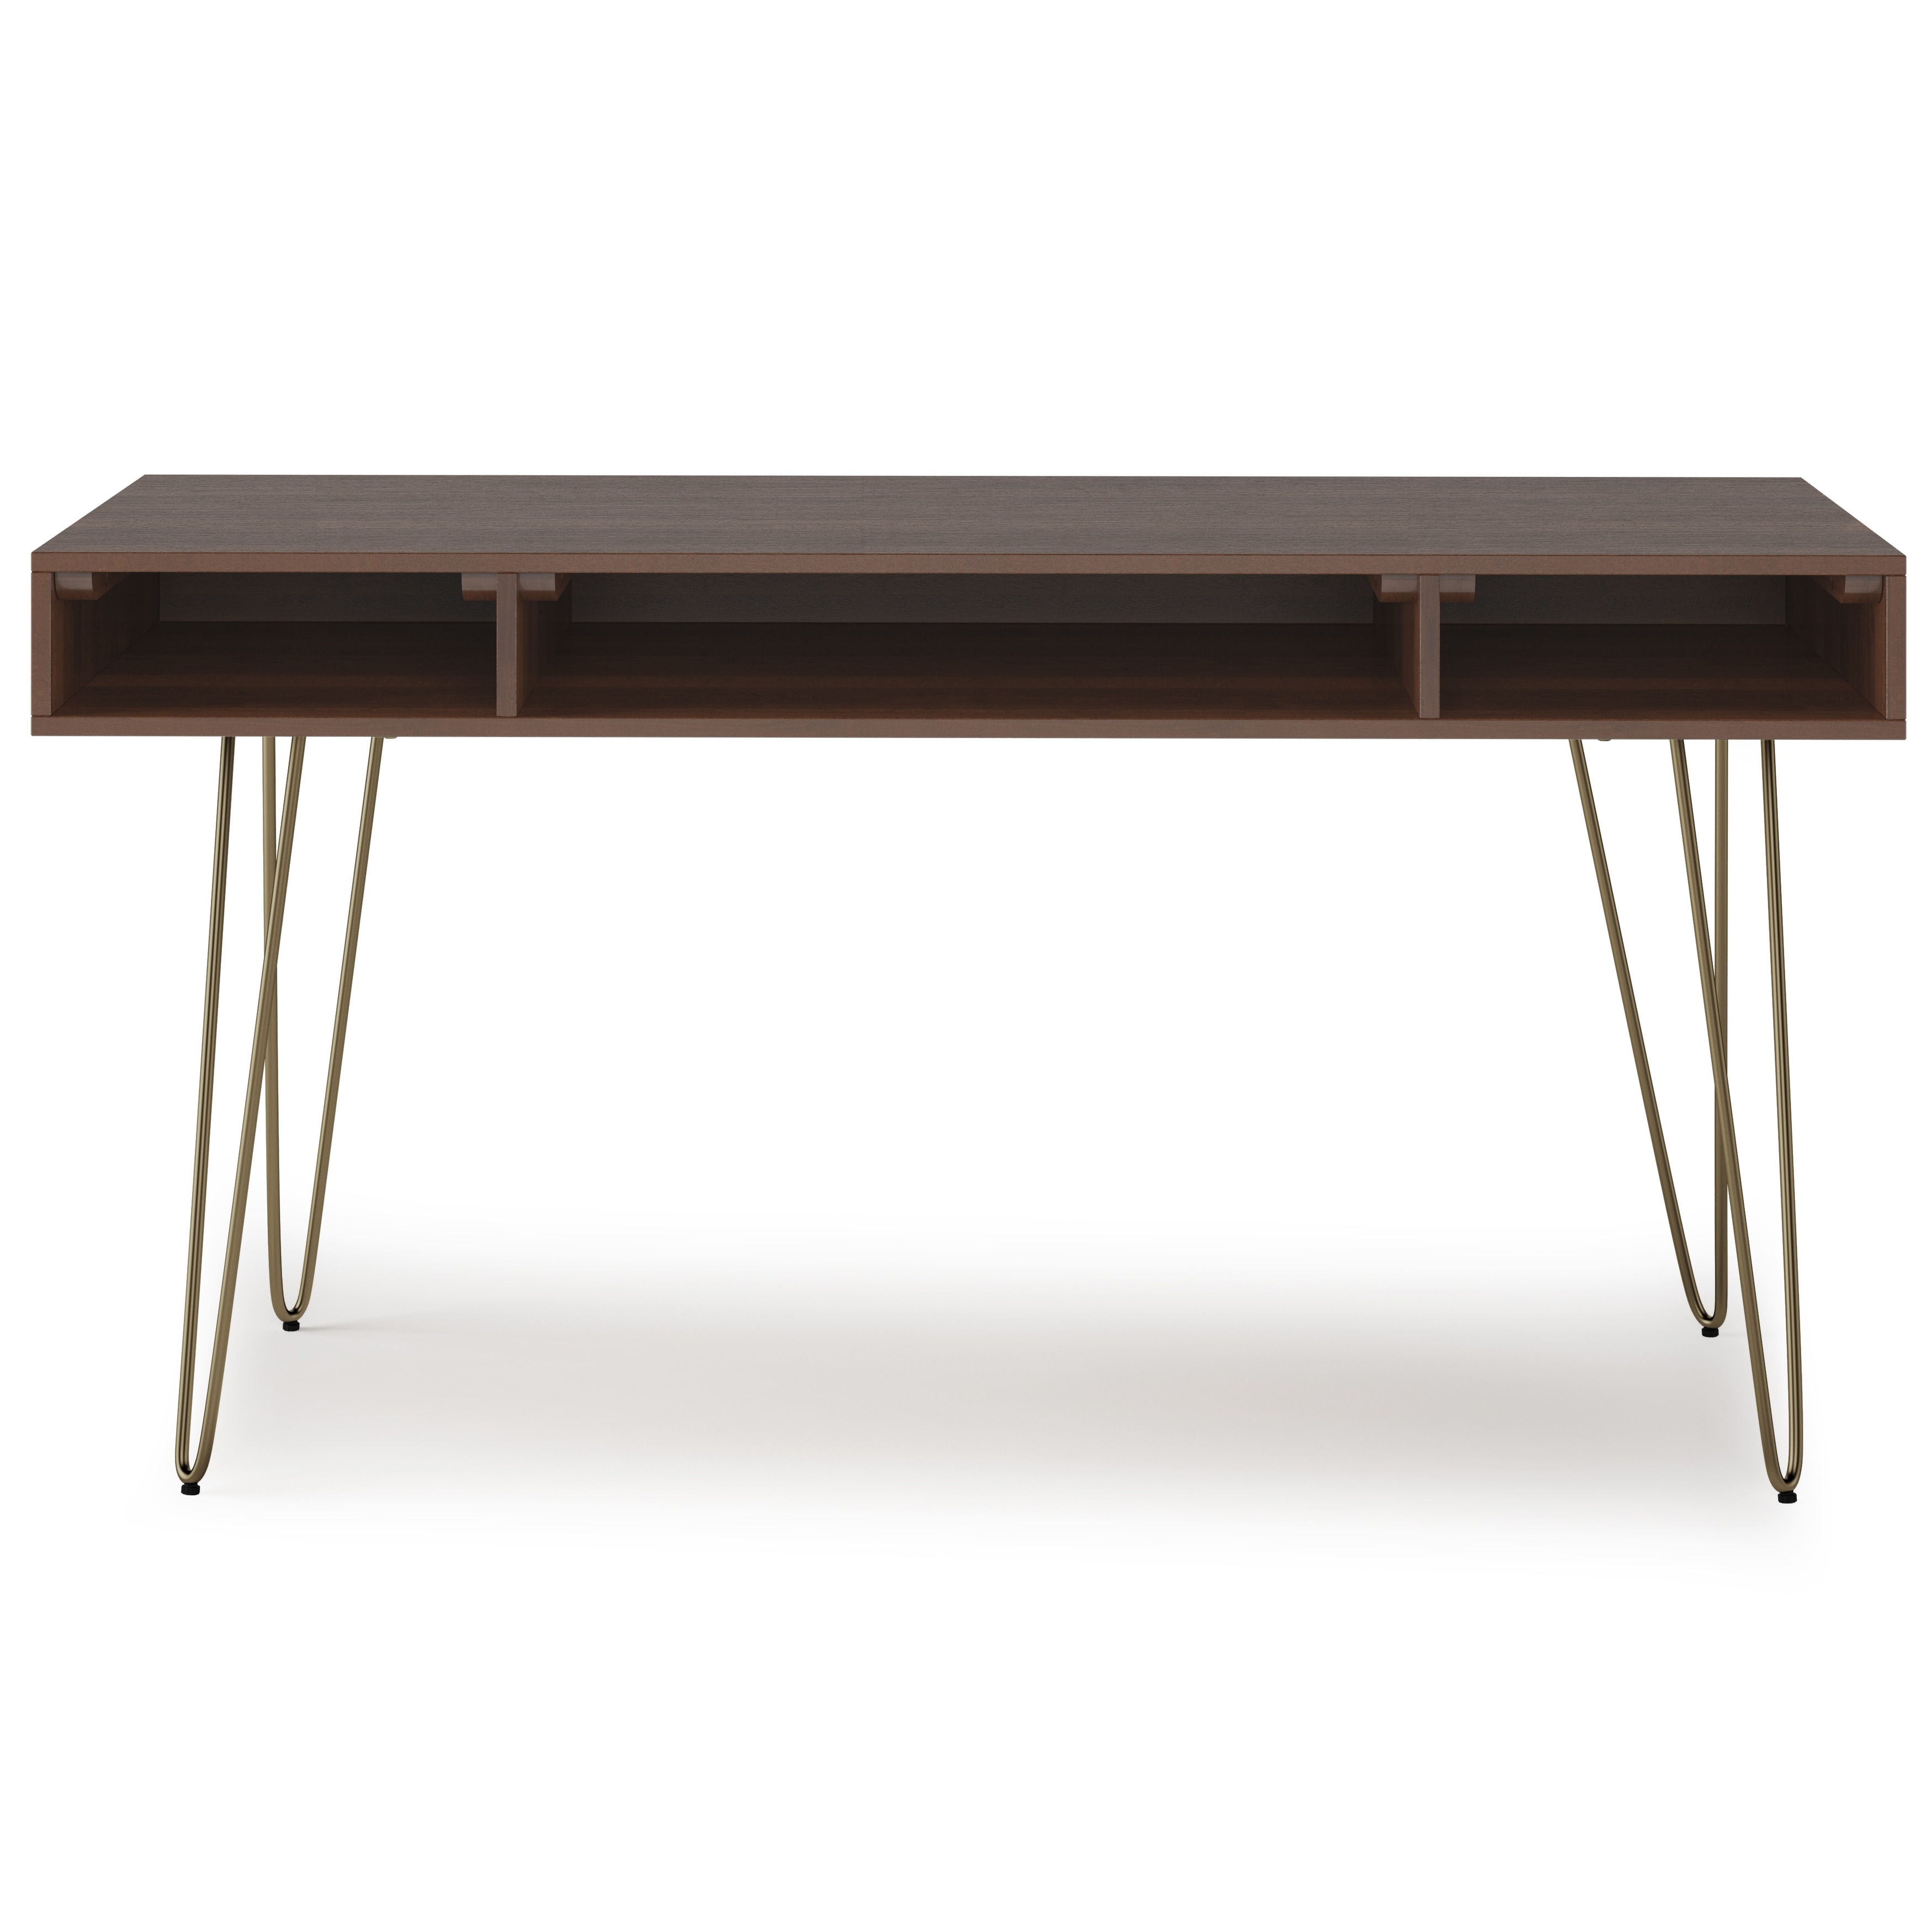 Moreno SOLID MANGO WOOD Contemporary Modern 60 inch Wide Desk - Umber Brown and Gold